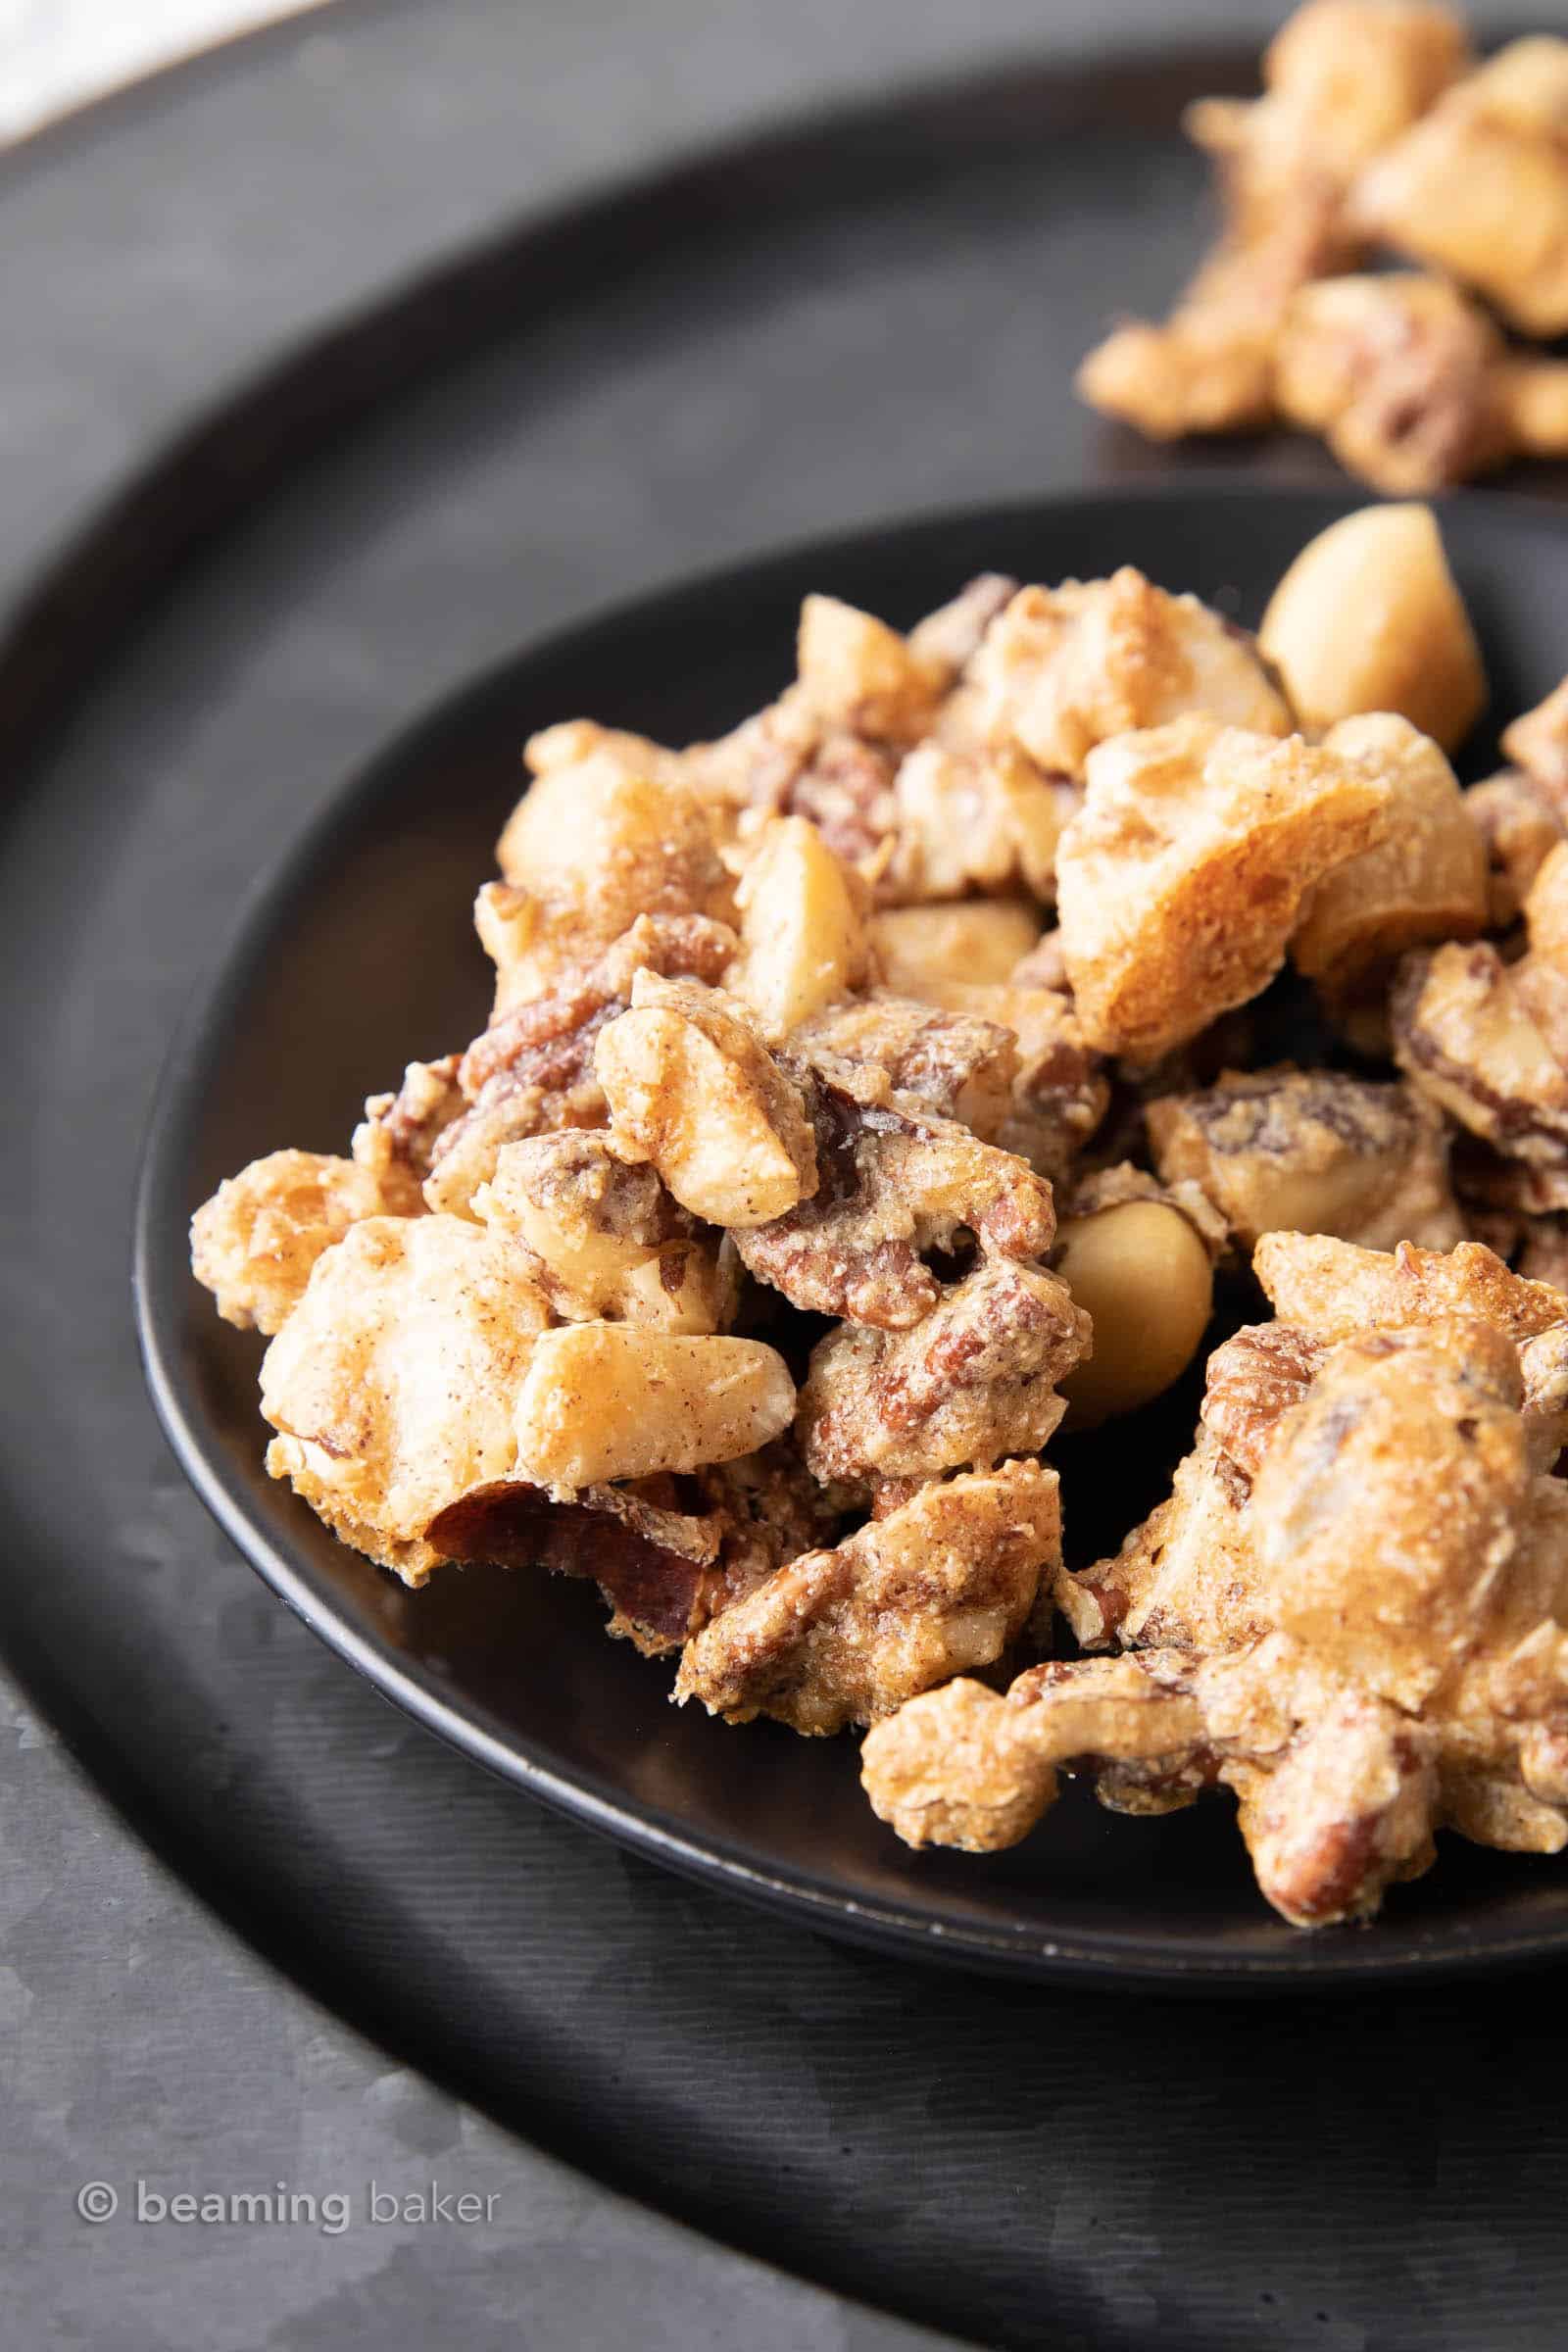 Keto Nut Clusters: just 3 ingredients and 5 minutes of prep for crispy, crunchy keto nut clusters with a sweet, nutty chew. Low Carb, Keto Nuts. #Keto #LowCarb #Nuts #KetoNuts | Recipe at BeamingBaker.com